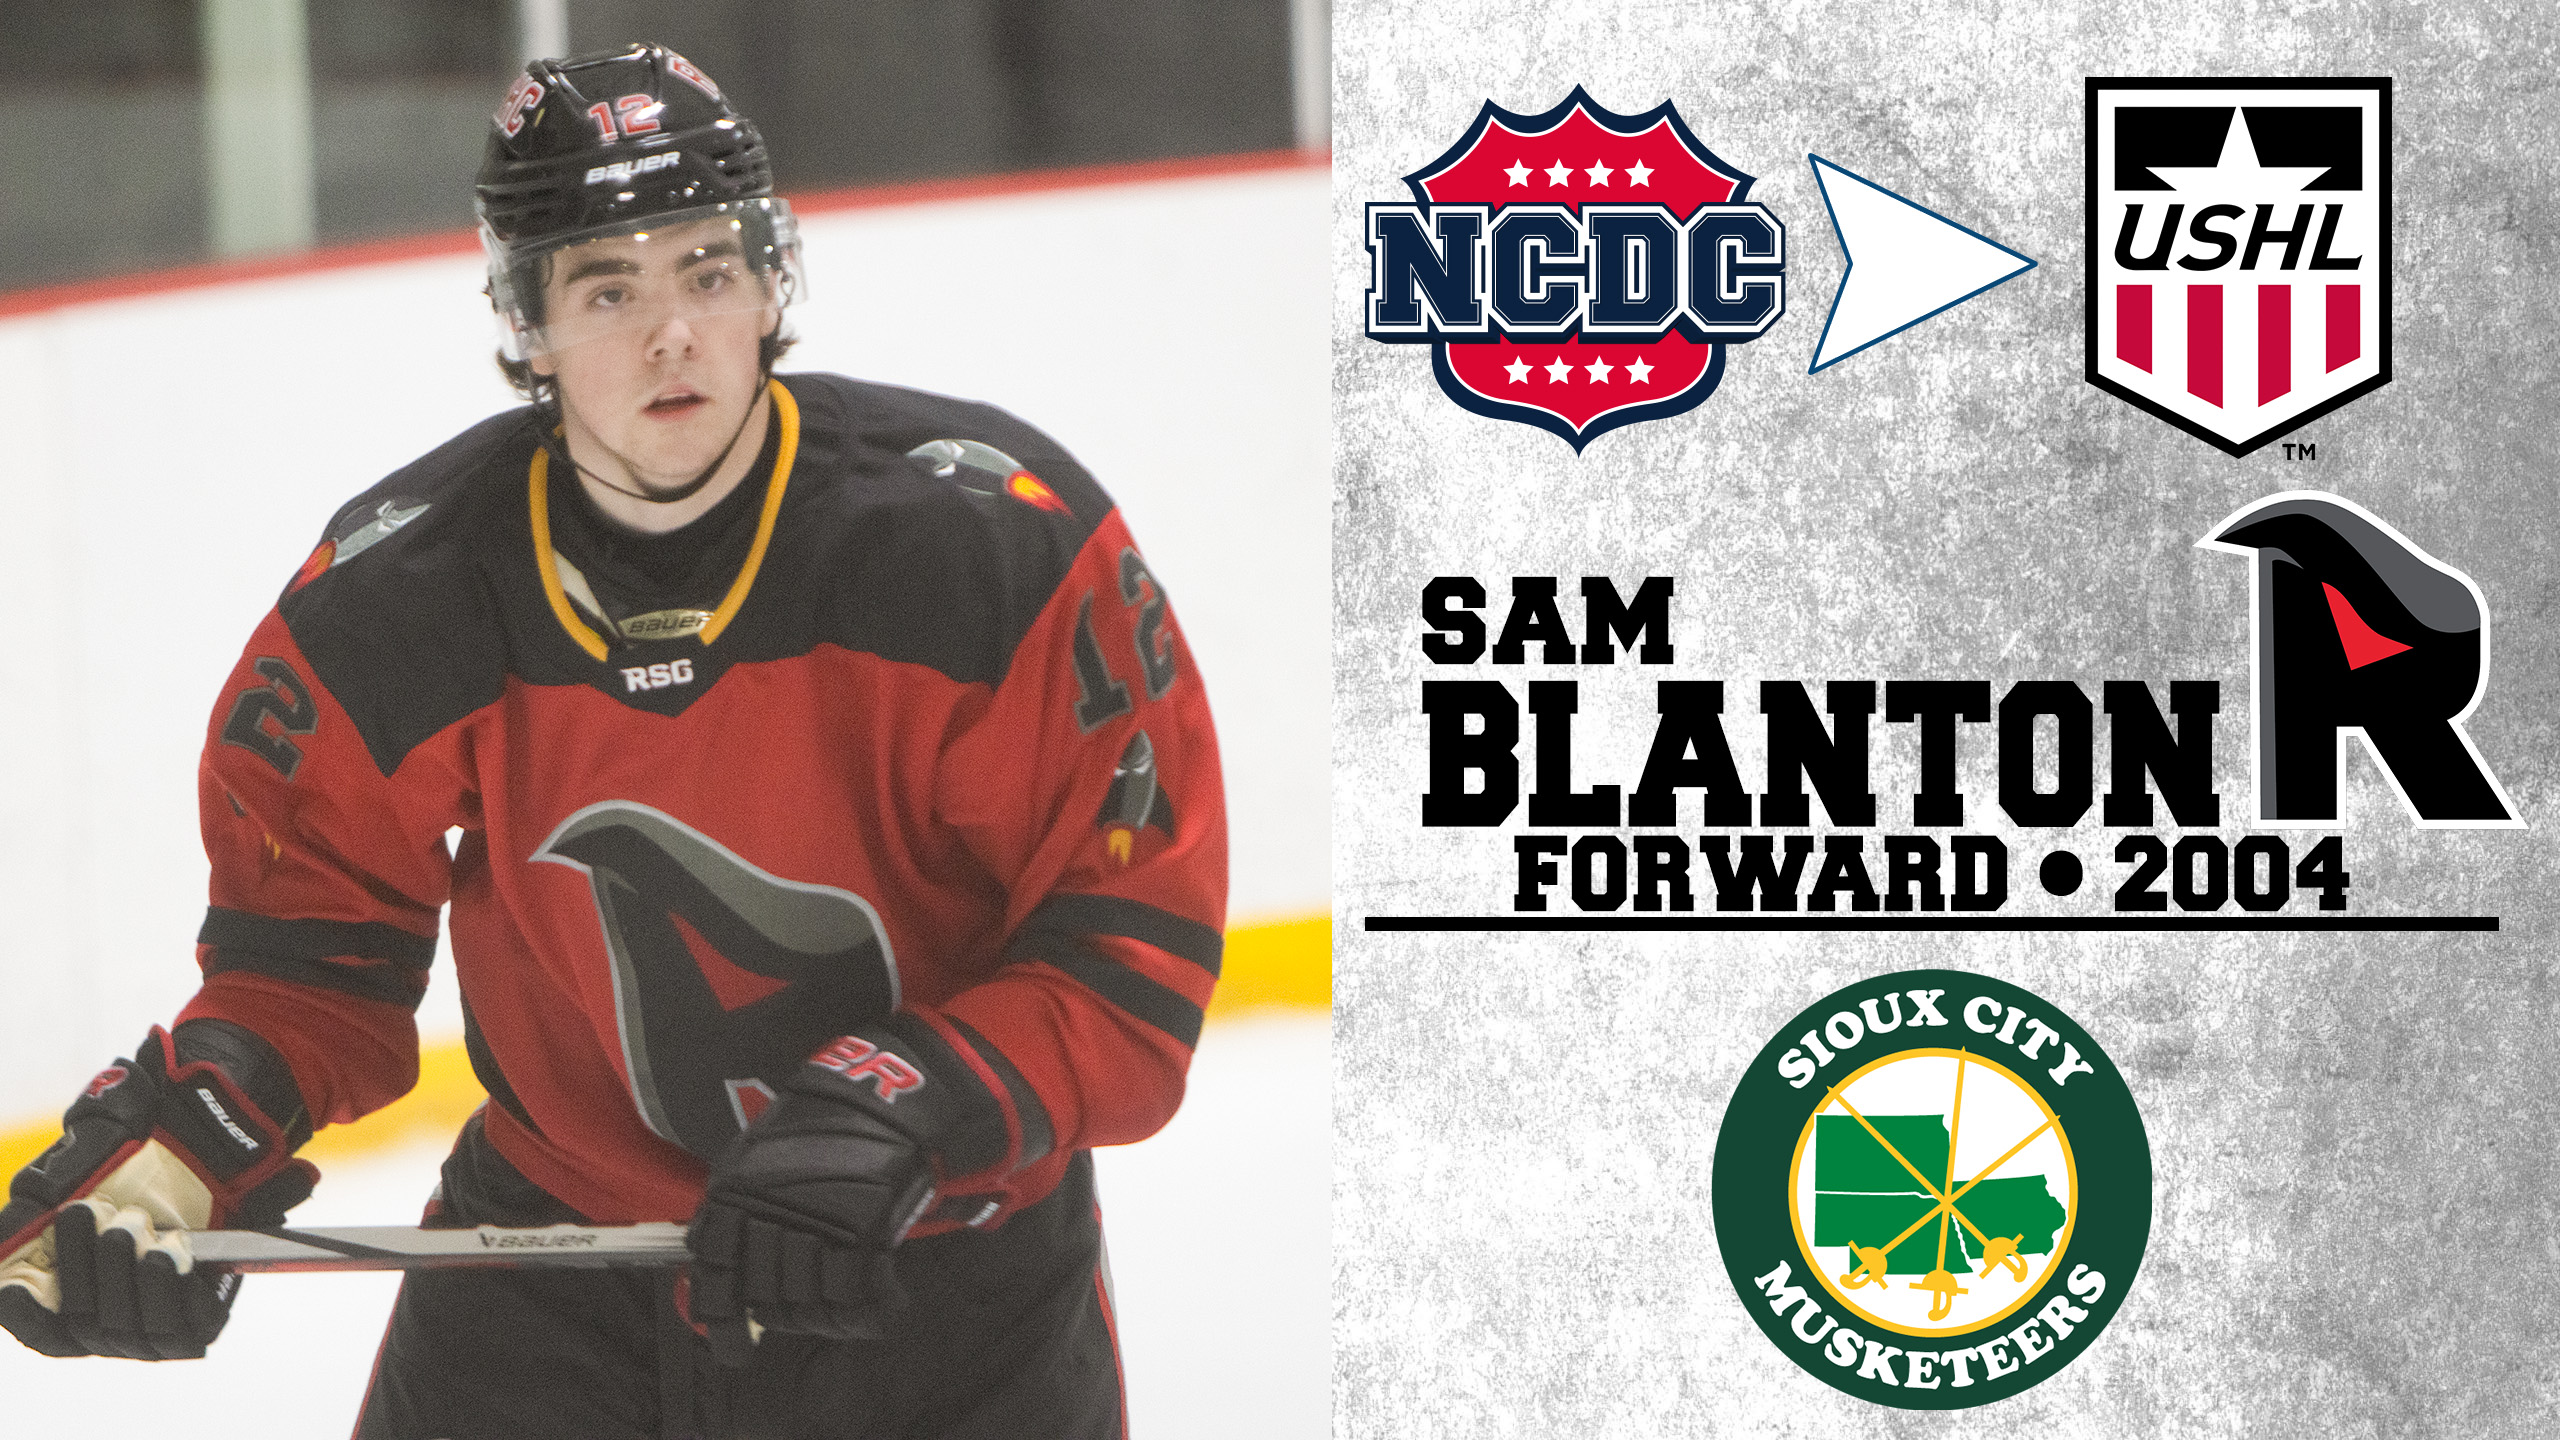 NCDC To USHL Advancement: Rockets Hockey Club’s Blanton Joins Sioux City, Will Make Game Debut Tuesday